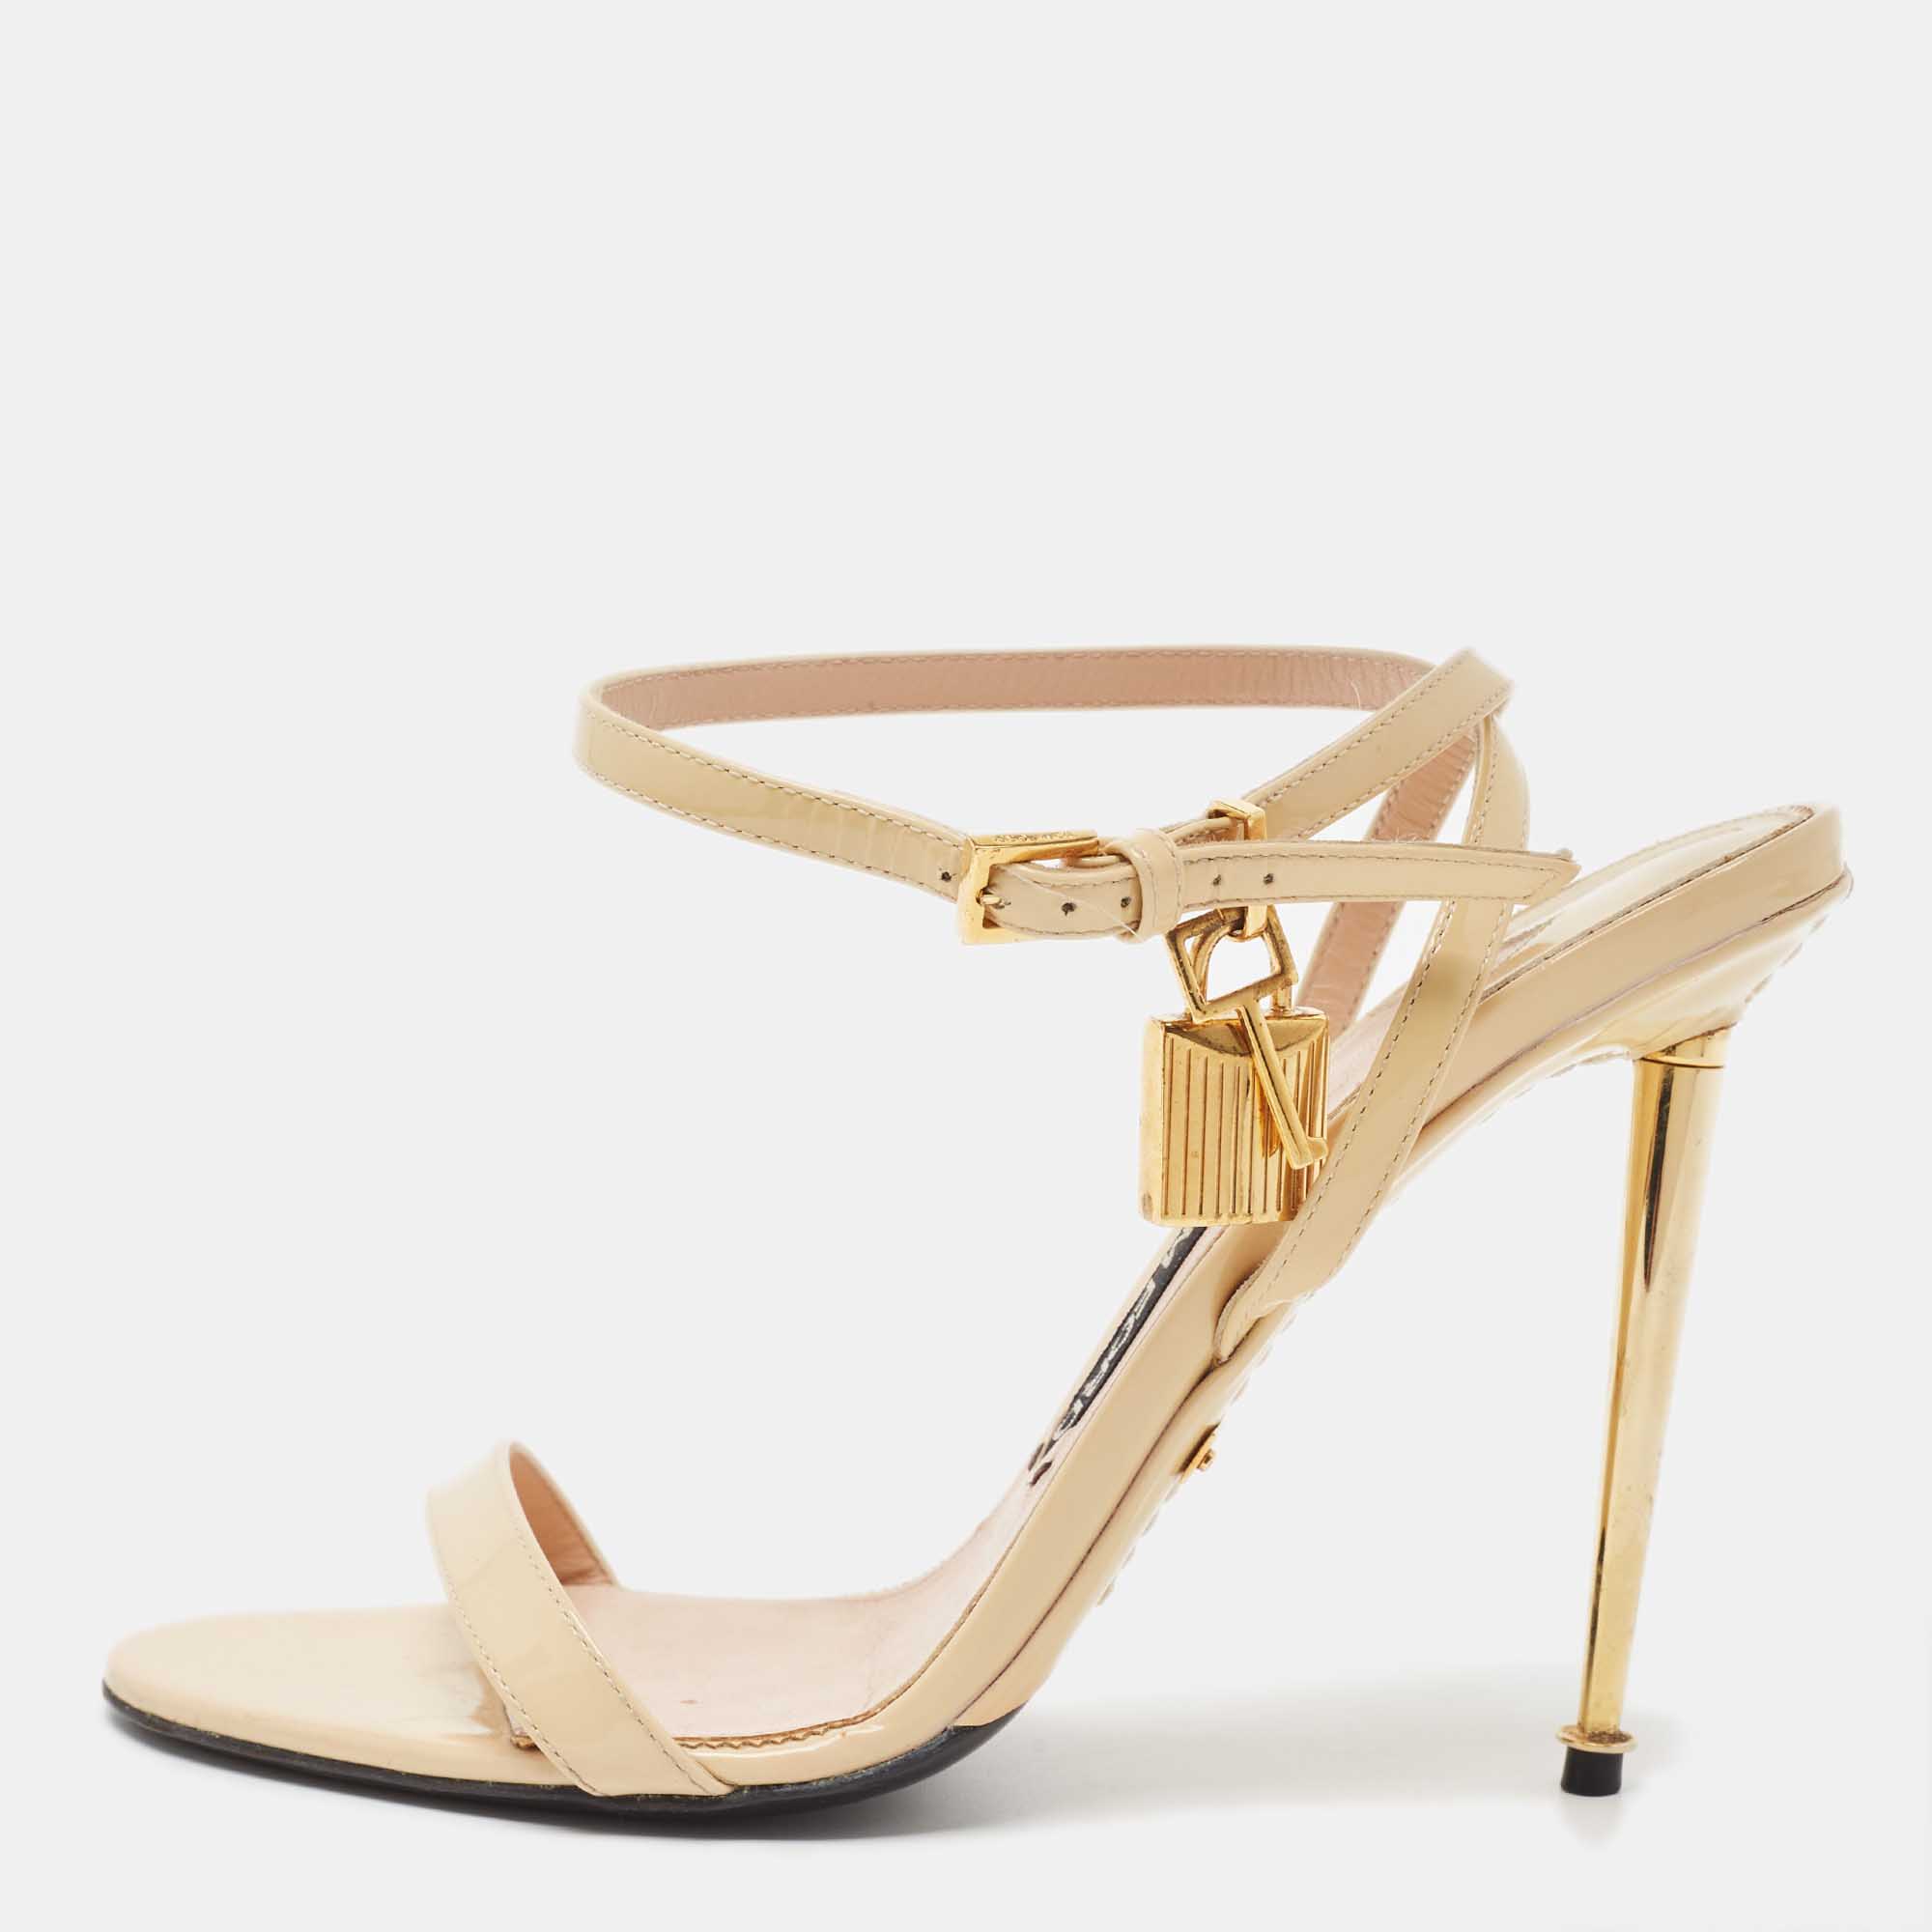 Tom Ford Cream Patent Leather Padlock Ankle Strap Sandals Size 39